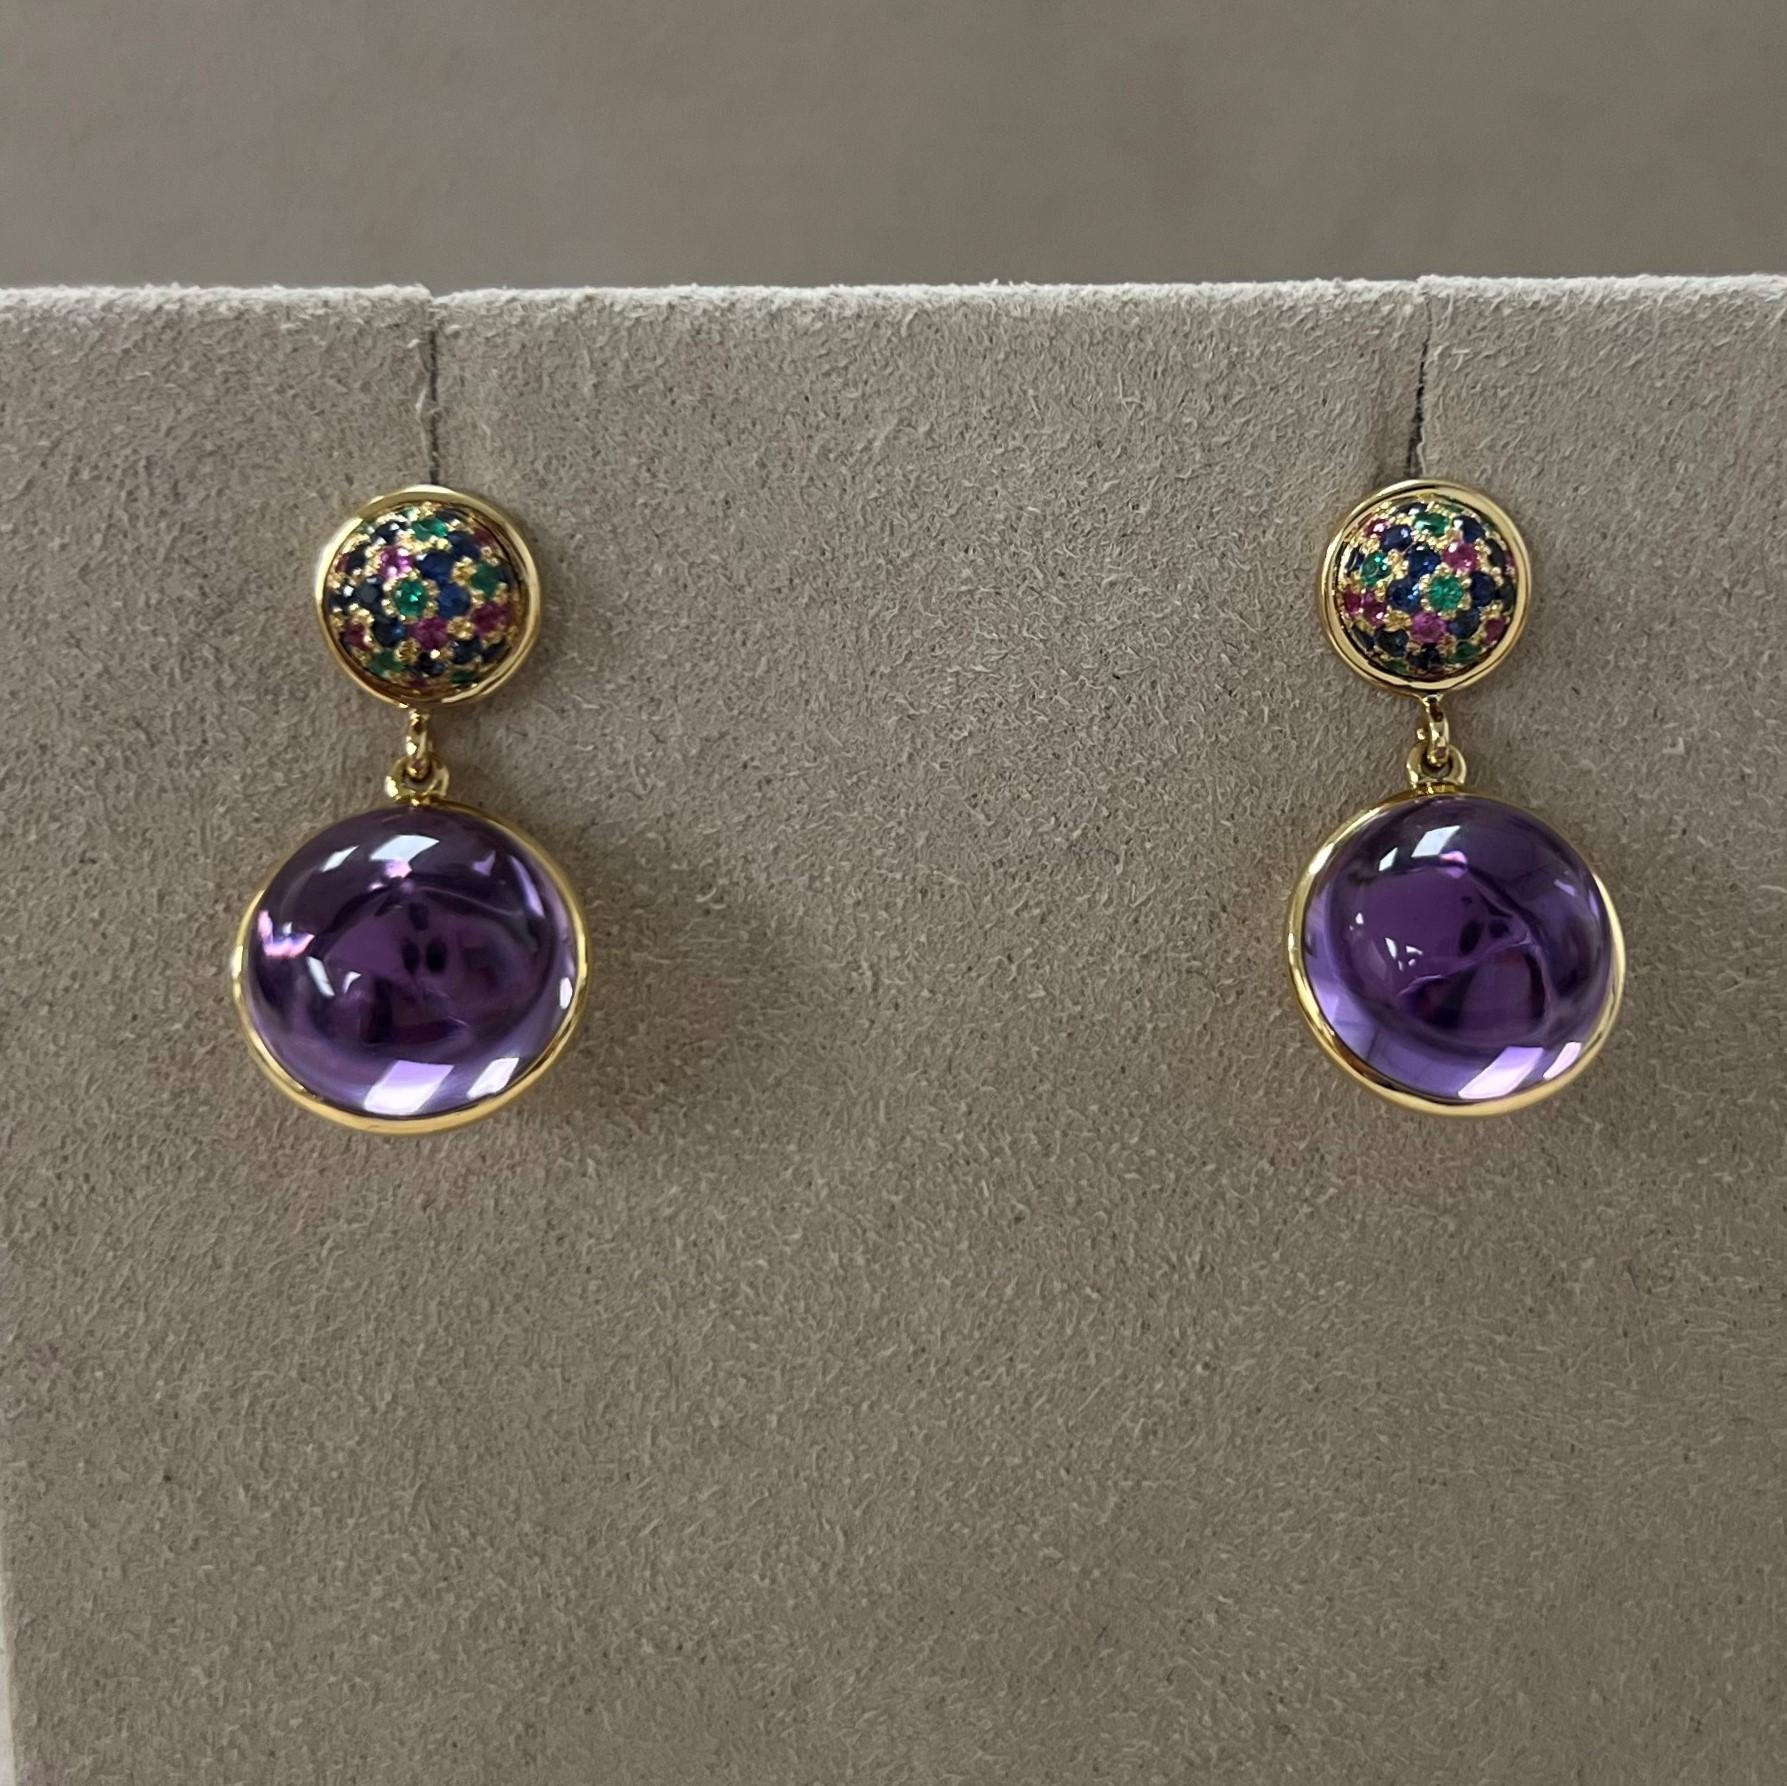 Created in 18 karat yellow gold
Amethyst 10 carats approx.
Emeralds 0.10 carat approx.
Rubies 0.30 carat approx.
Sapphires 0.18 carat approx.
Post back for pierced ears


About the Designers ~ Dharmesh & Namrata

Drawing inspiration from little